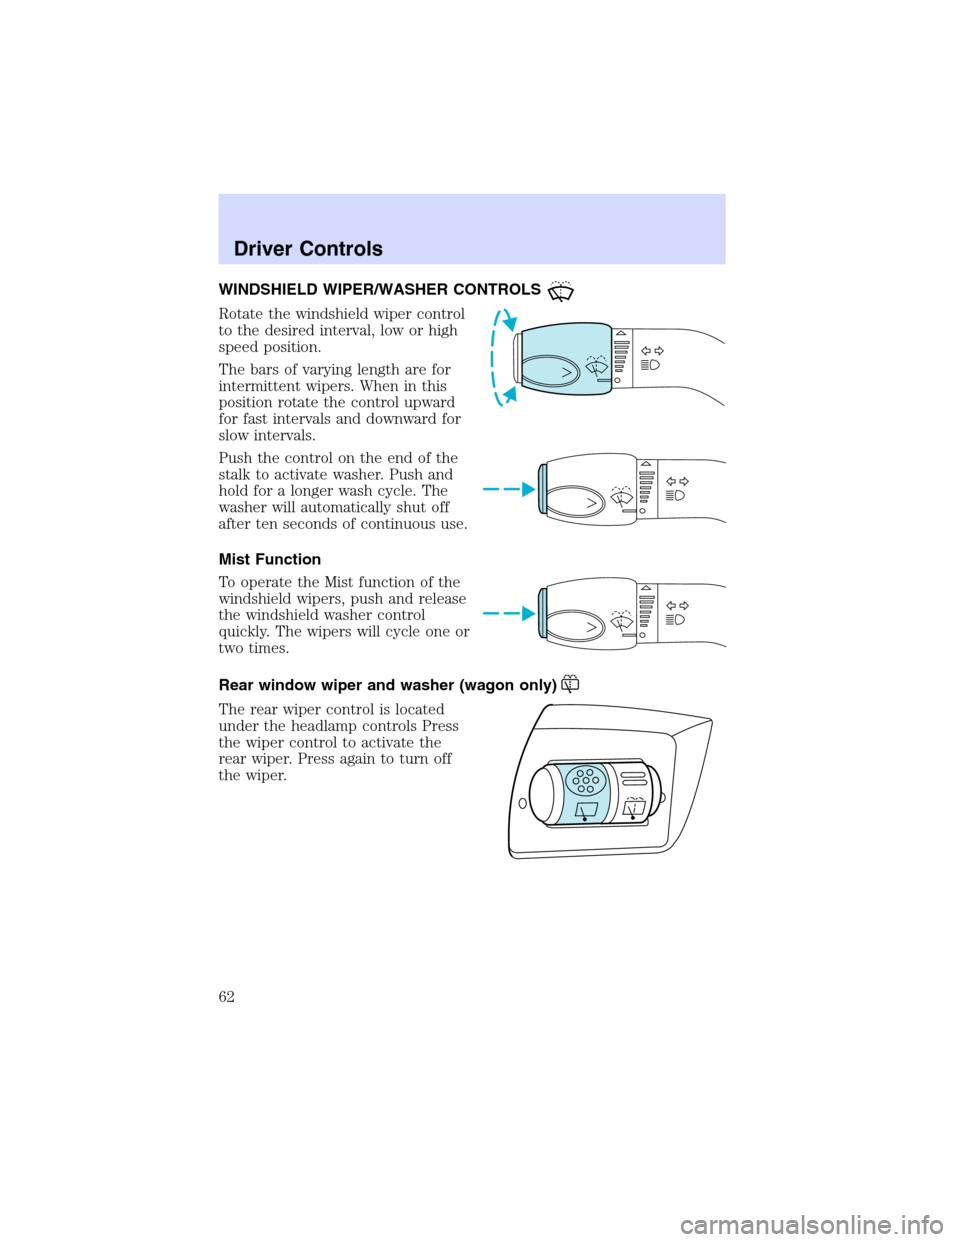 Mercury Sable 2002  Owners Manuals WINDSHIELD WIPER/WASHER CONTROLS
Rotate the windshield wiper control
to the desired interval, low or high
speed position.
The bars of varying length are for
intermittent wipers. When in this
position 